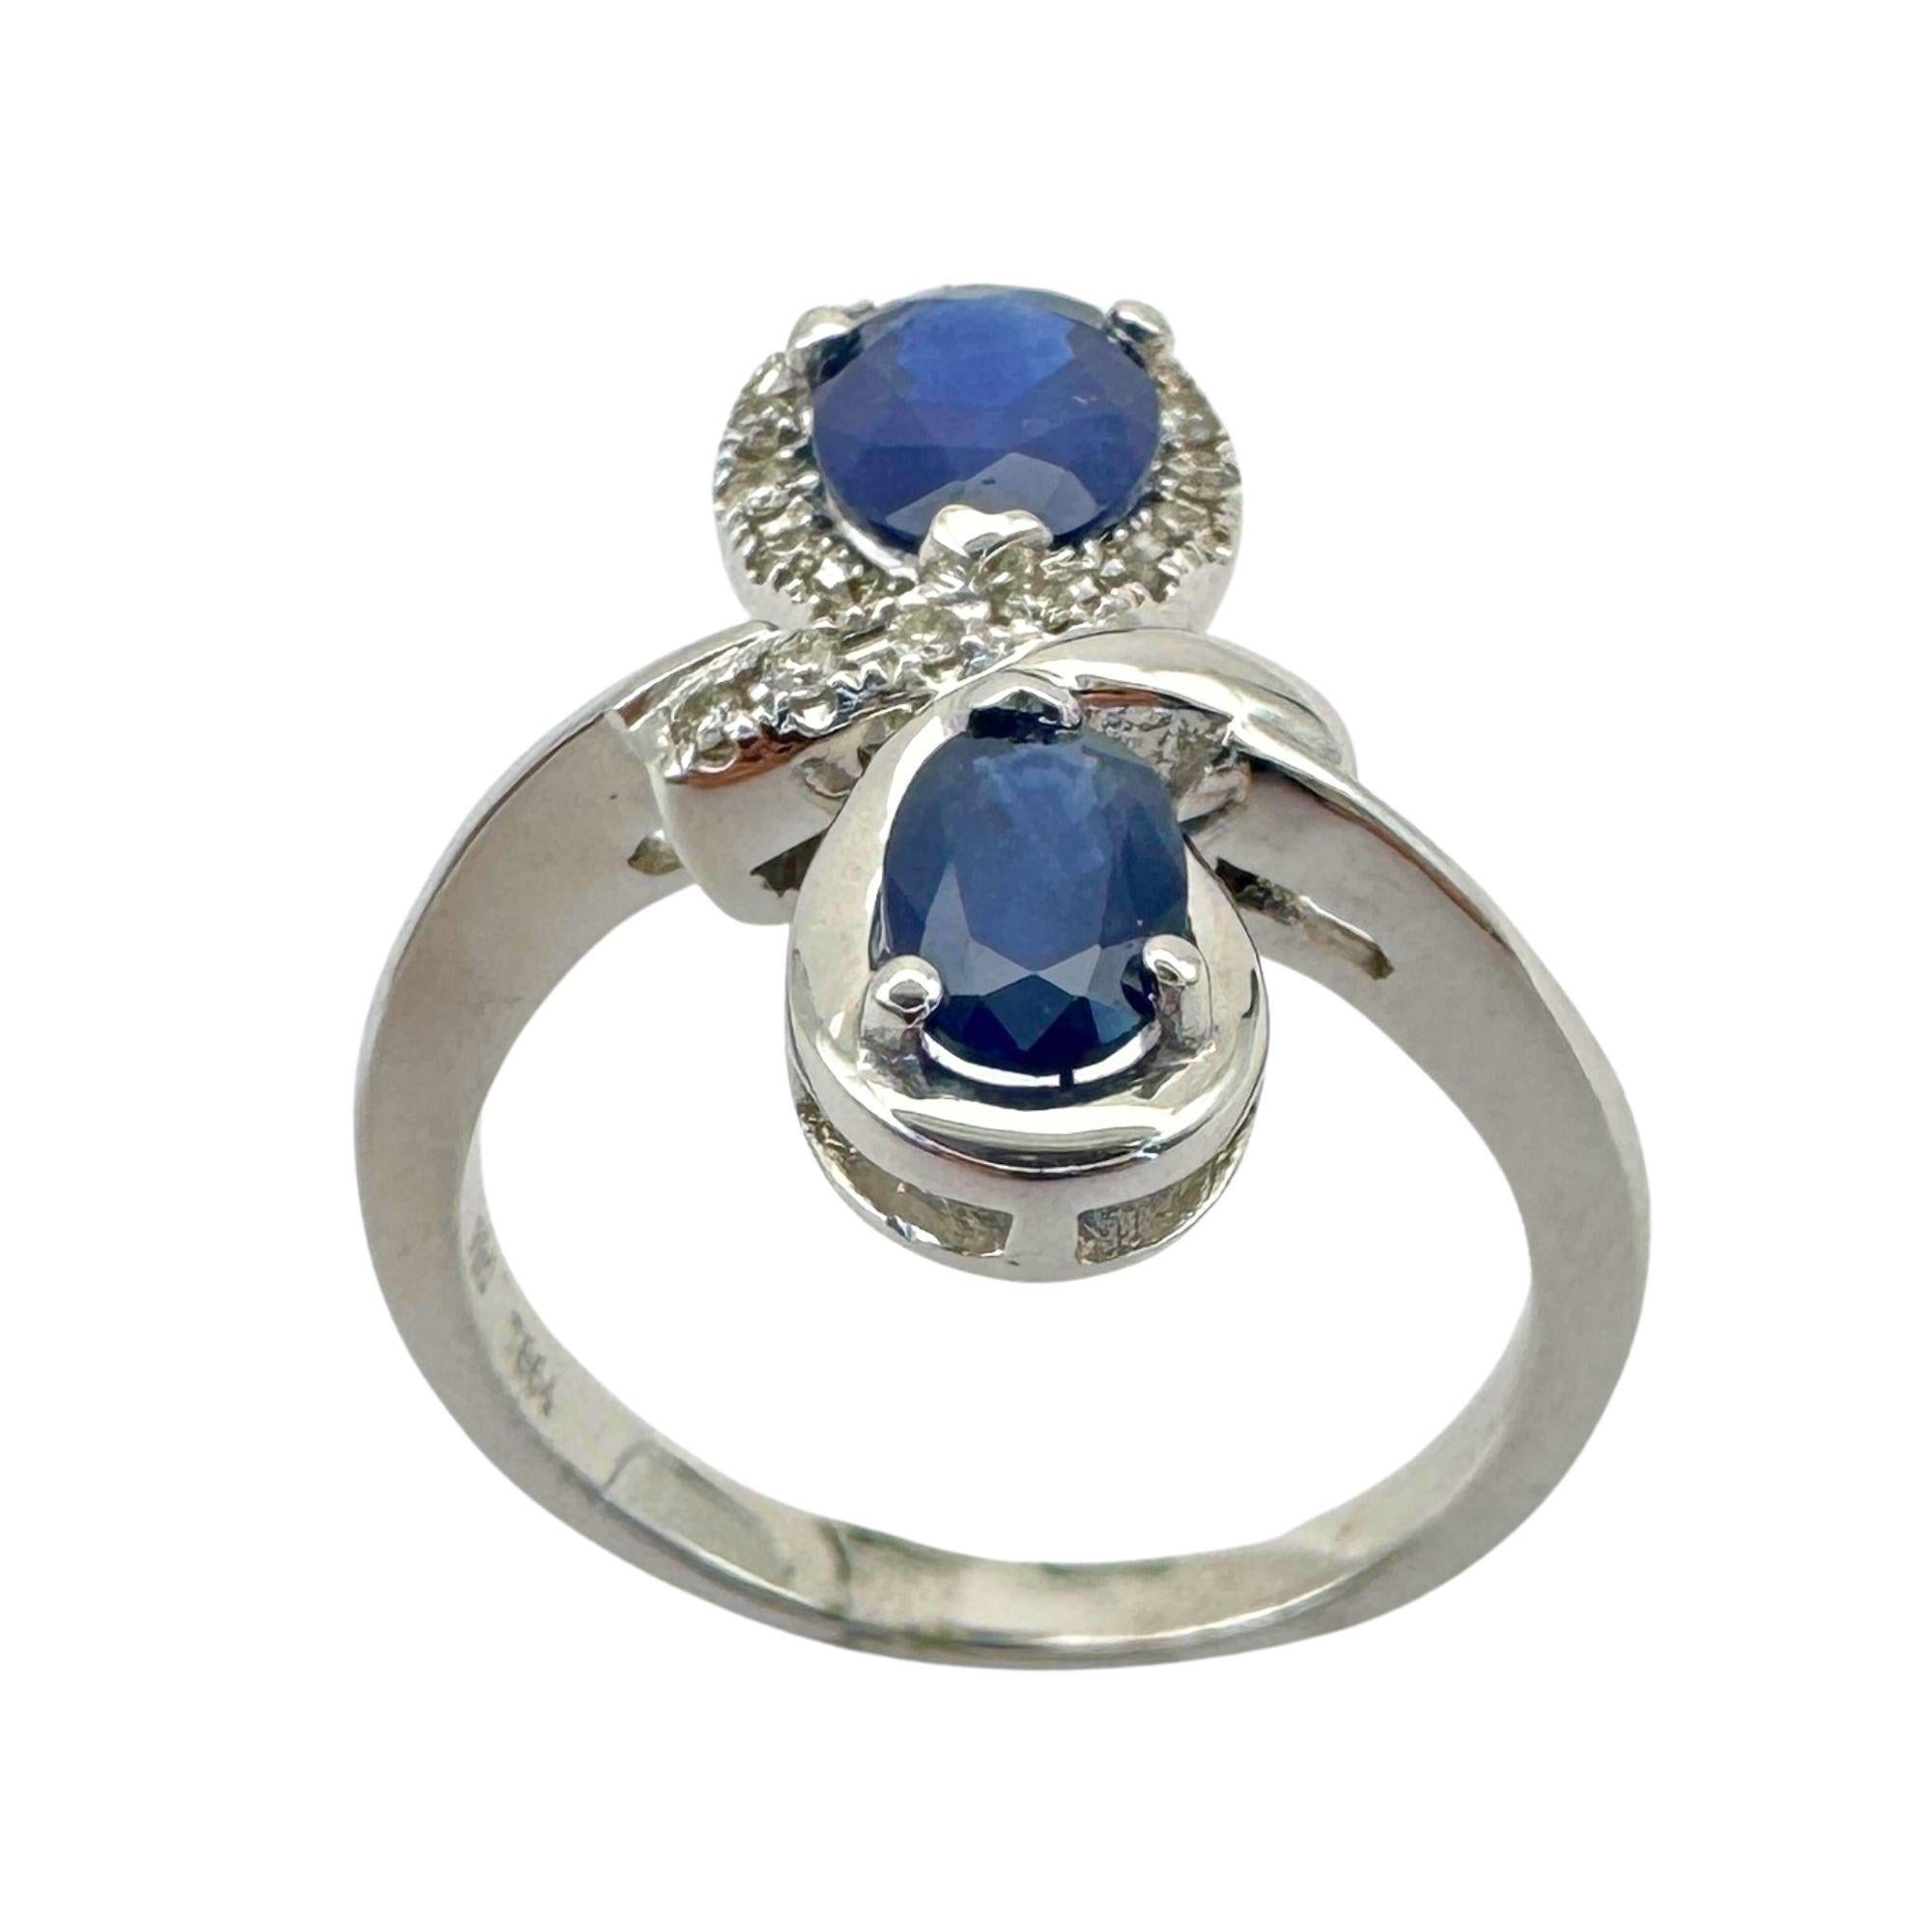 Put a pop of color on your finger with our 18k Diamond and Sapphire Ring! Made with 18k white gold and adorned with a sparkling 0.10 carat diamonds and stunning 1.48 carat sapphires, this ring is the epitome of elegance.

18k Diamond and Sapphire